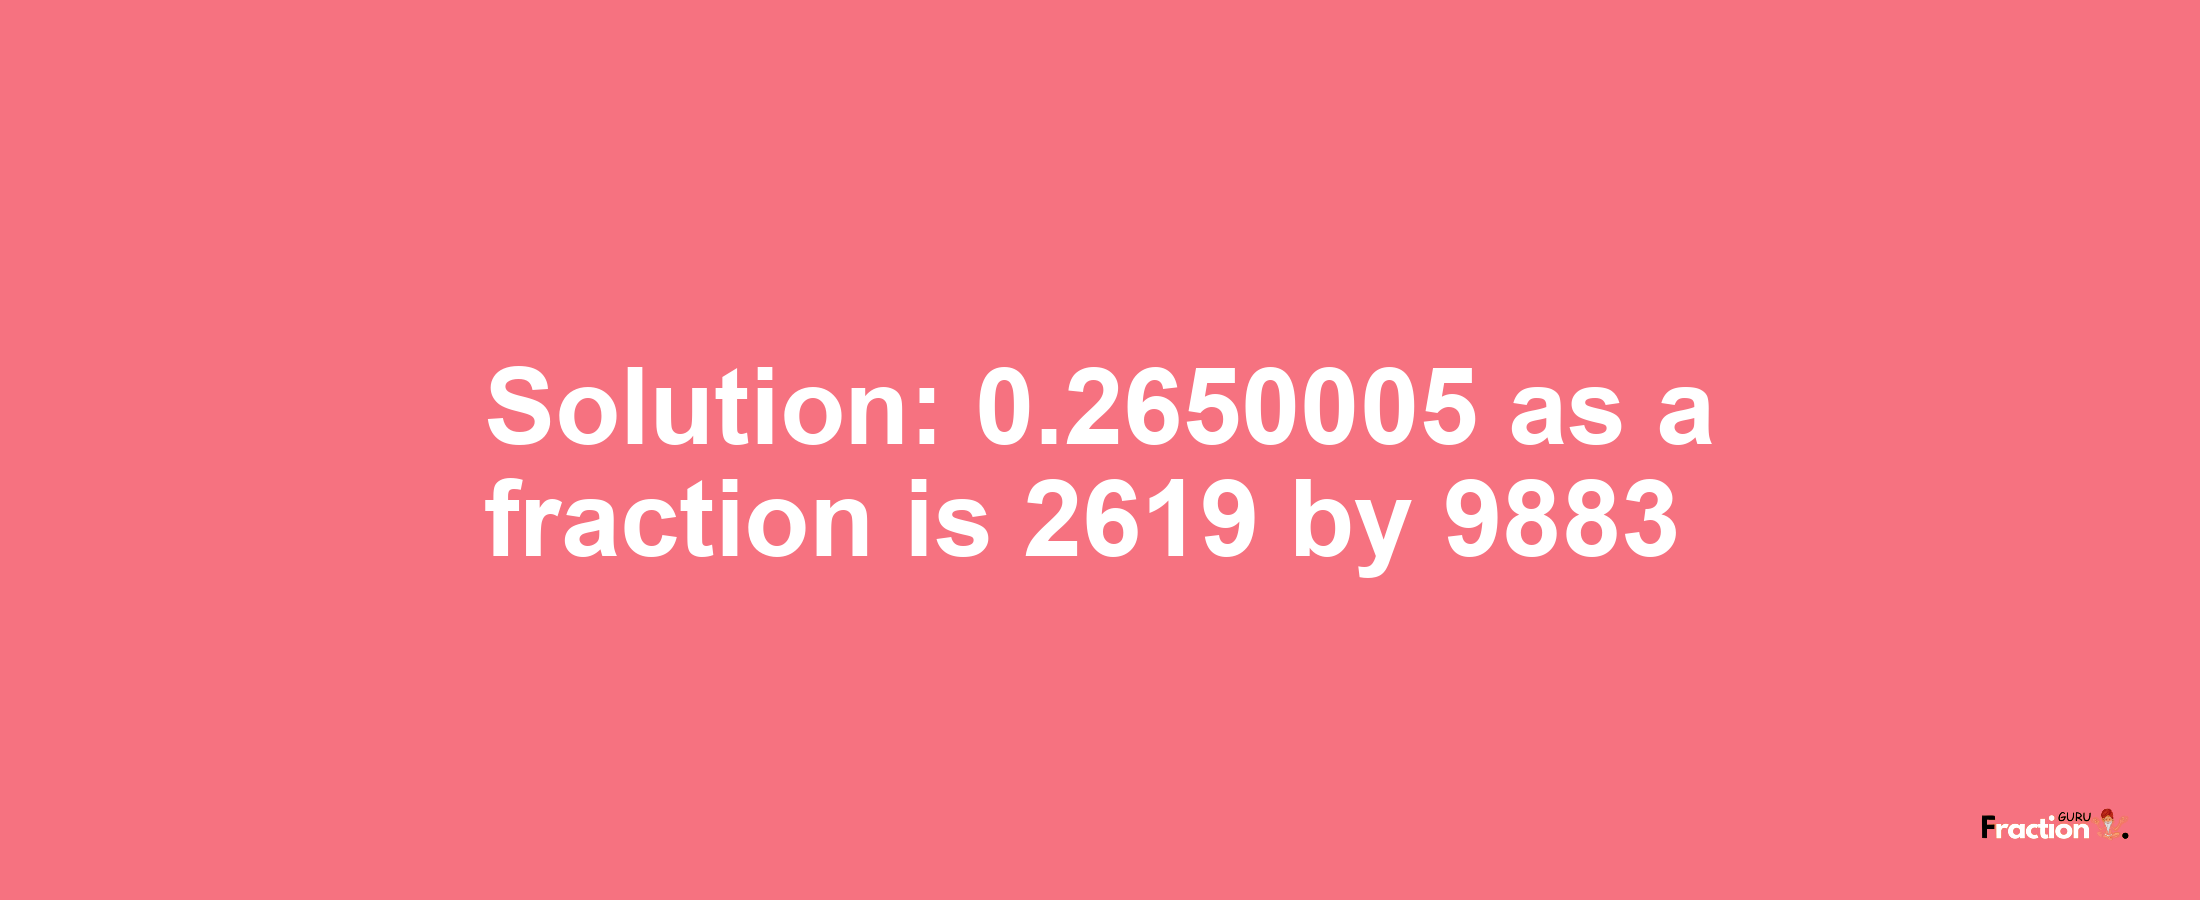 Solution:0.2650005 as a fraction is 2619/9883